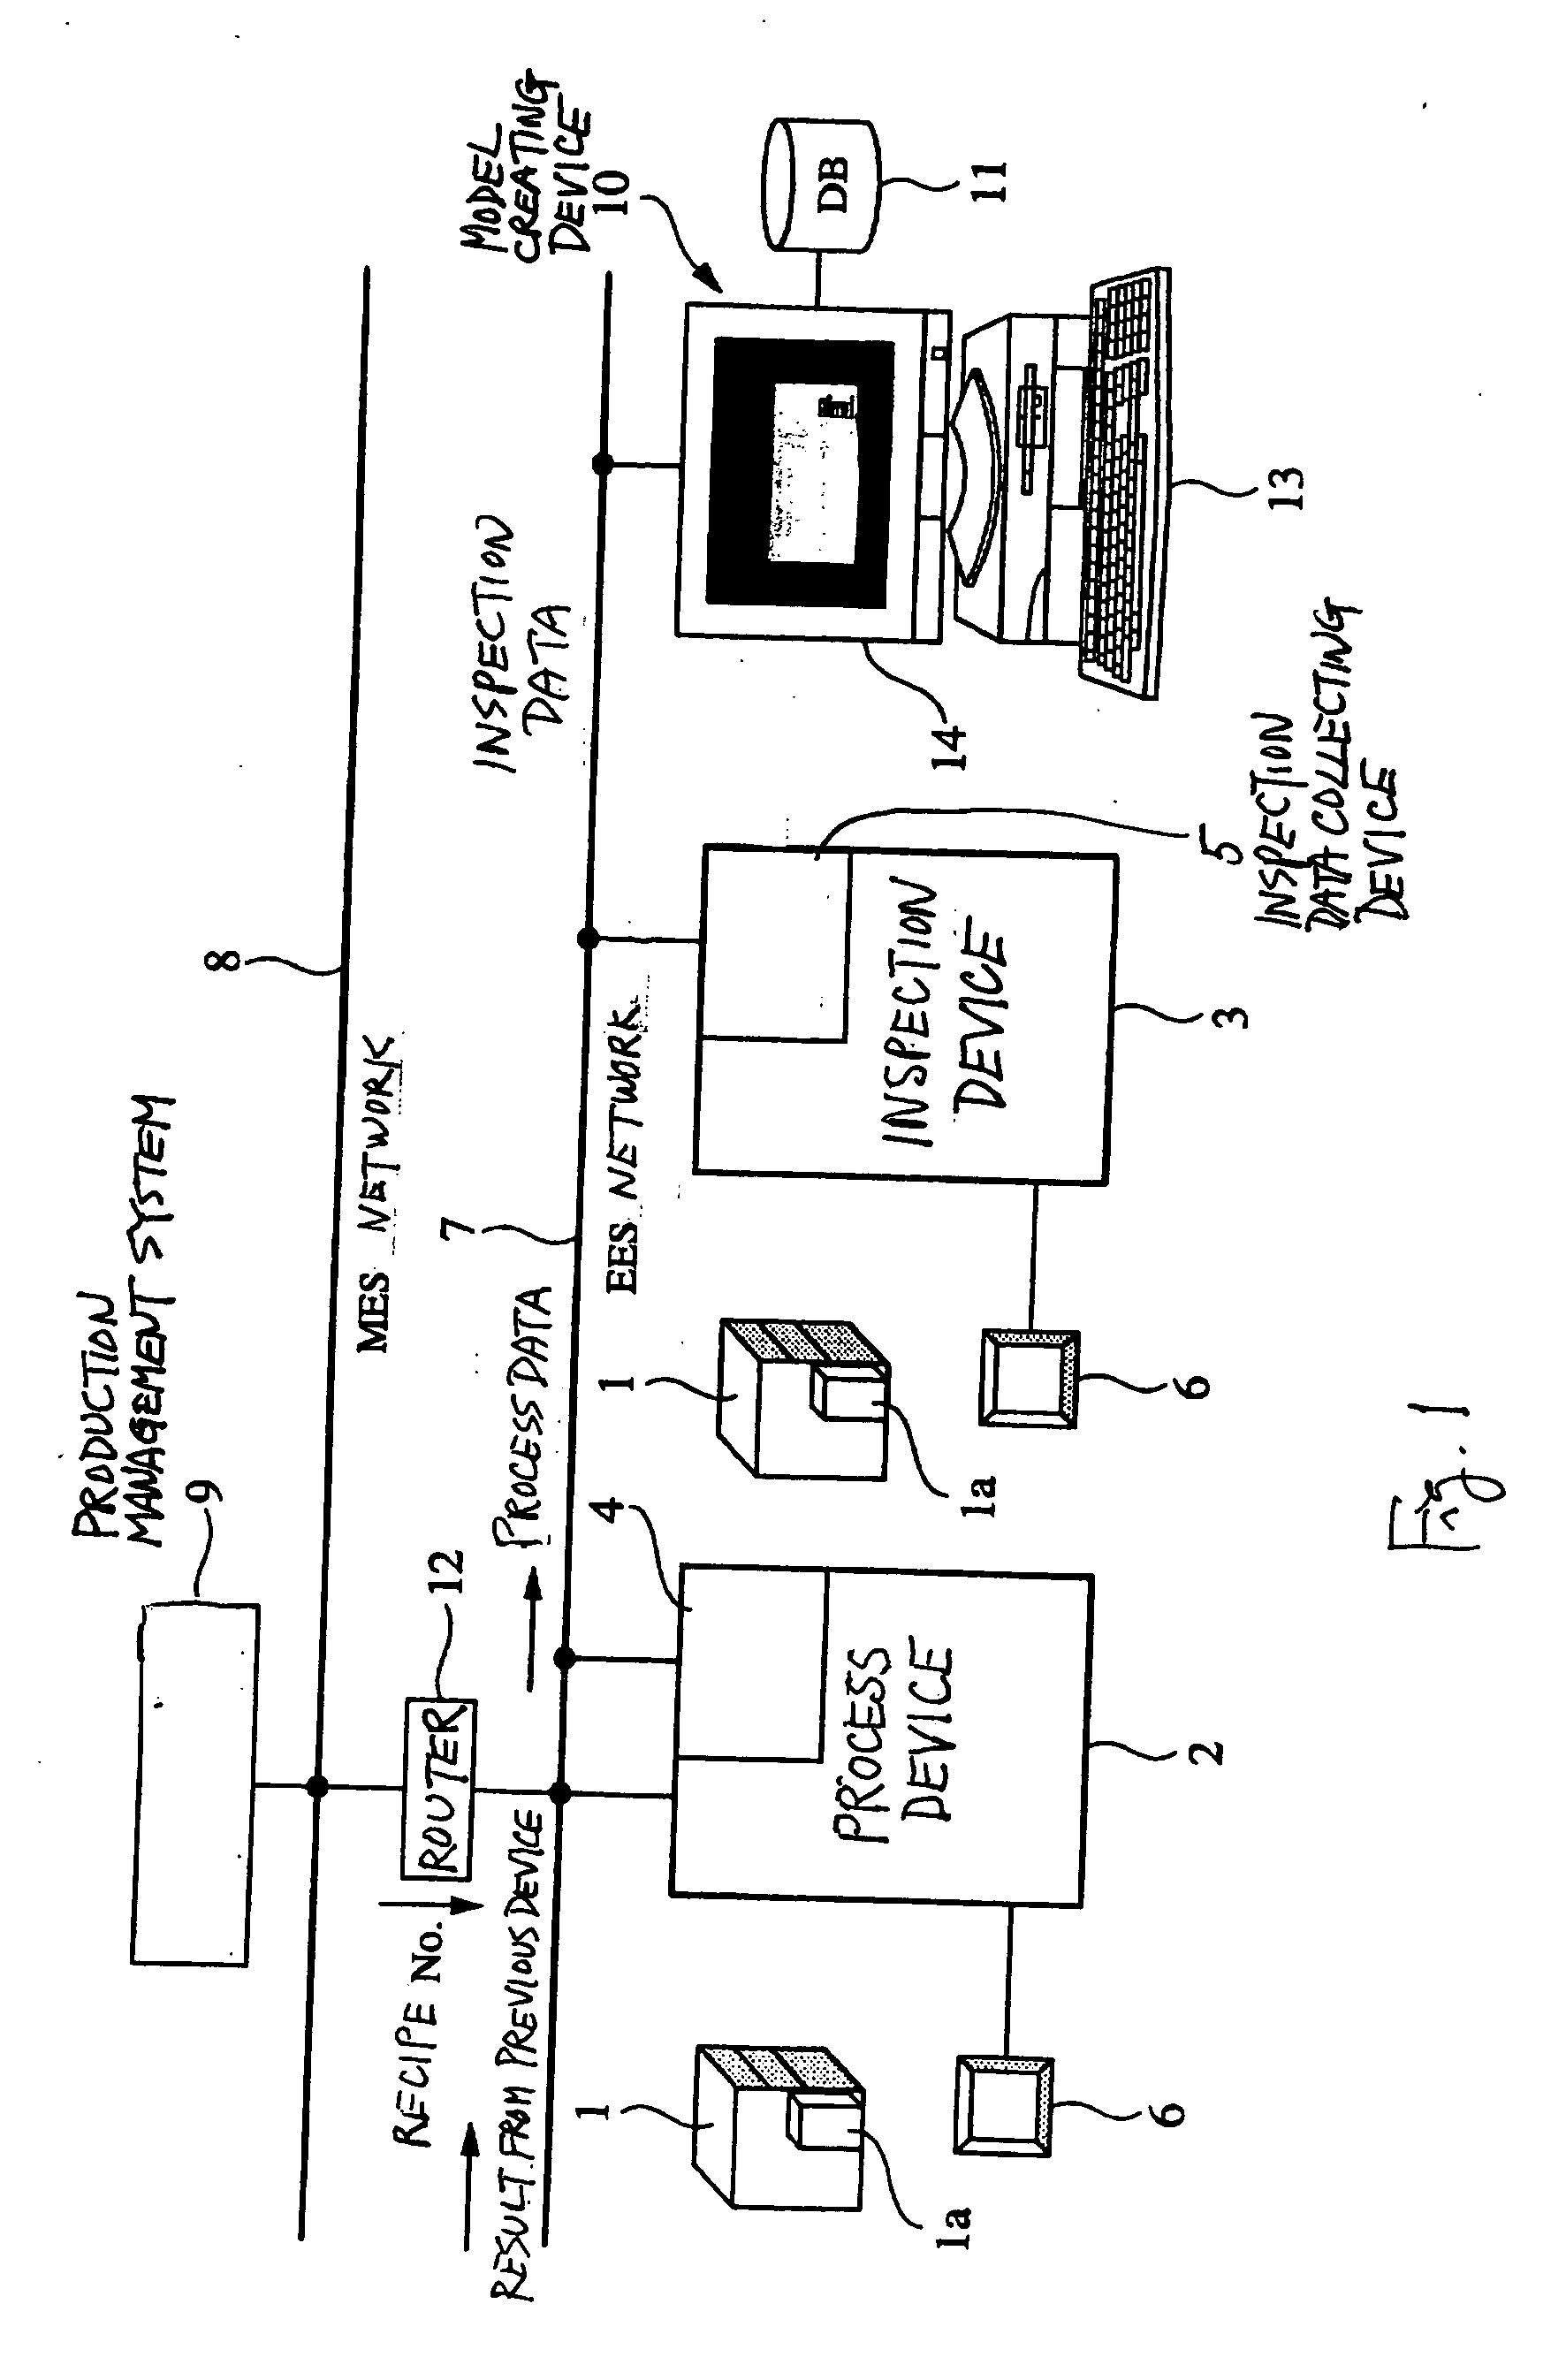 Device for and method of creating a model for determining relationship between process and quality